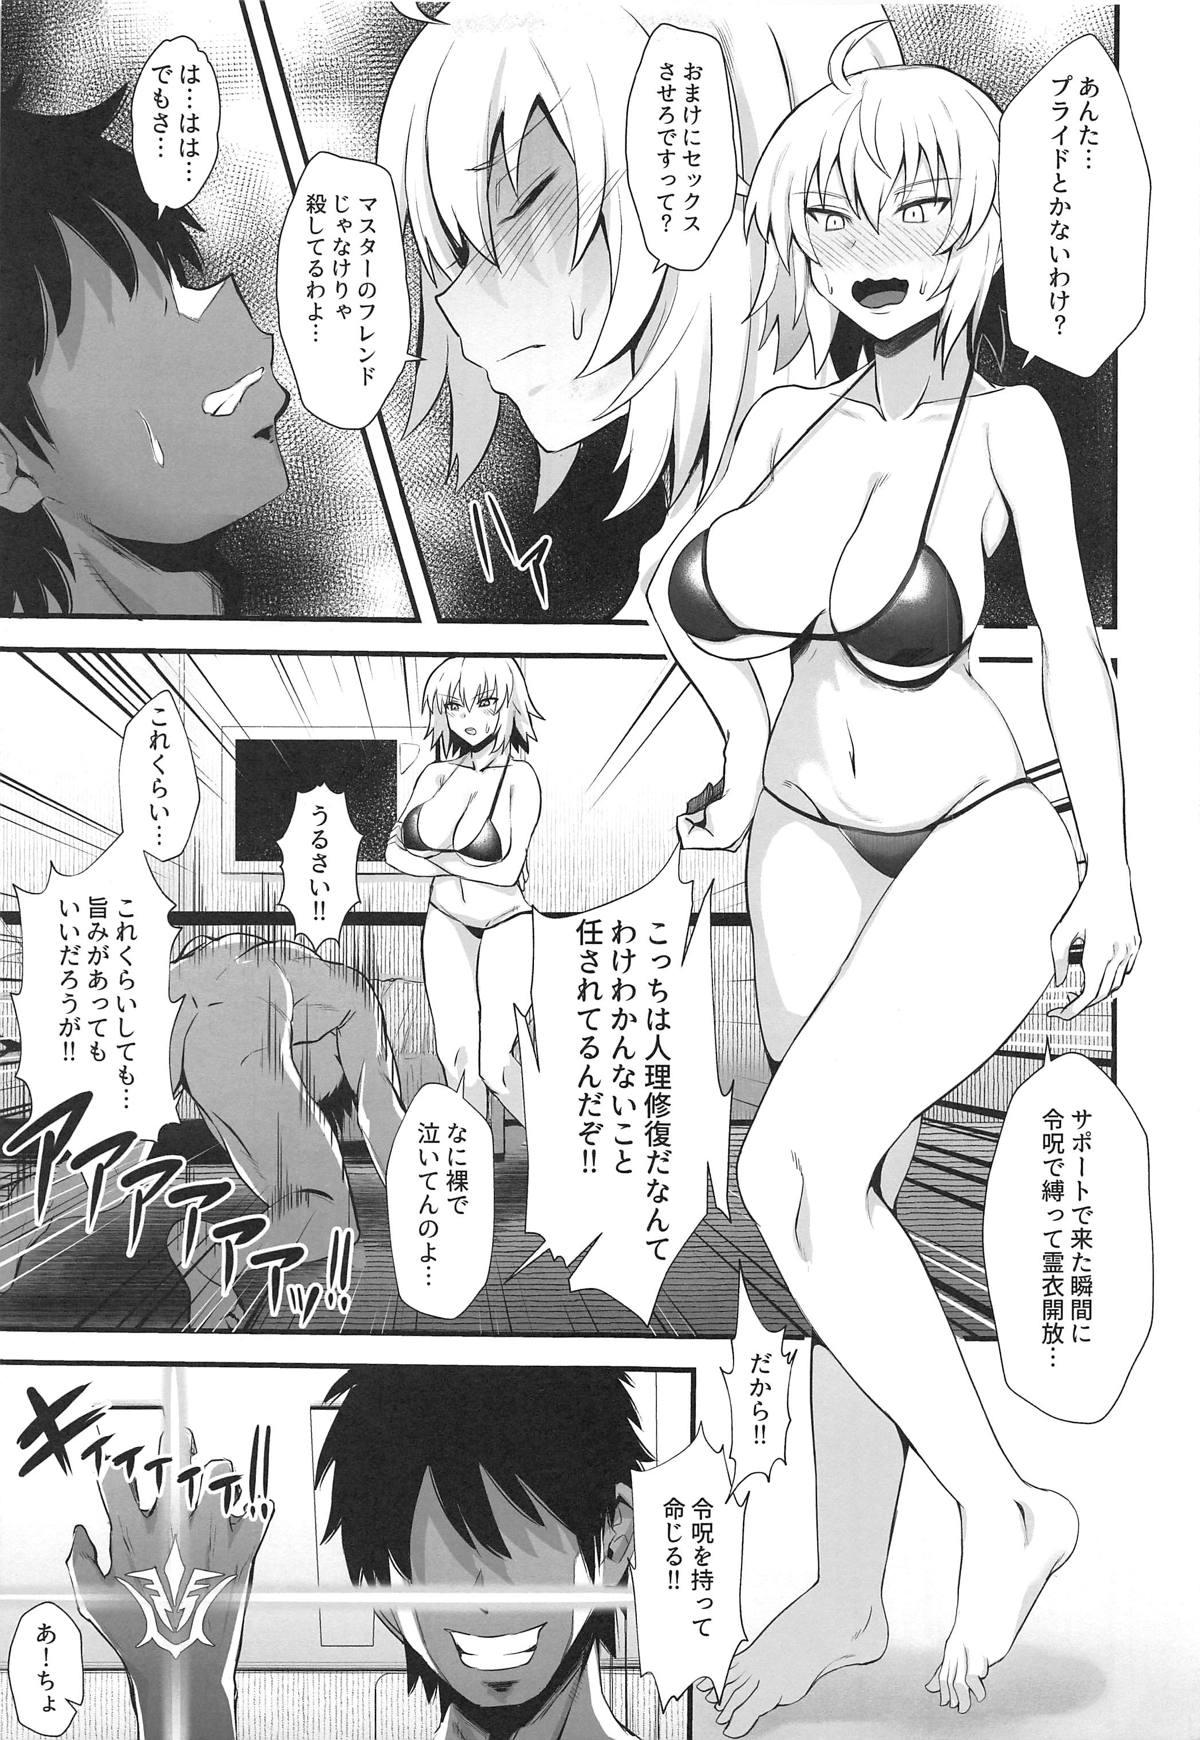 Fist Support Order - Fate grand order Women - Page 3